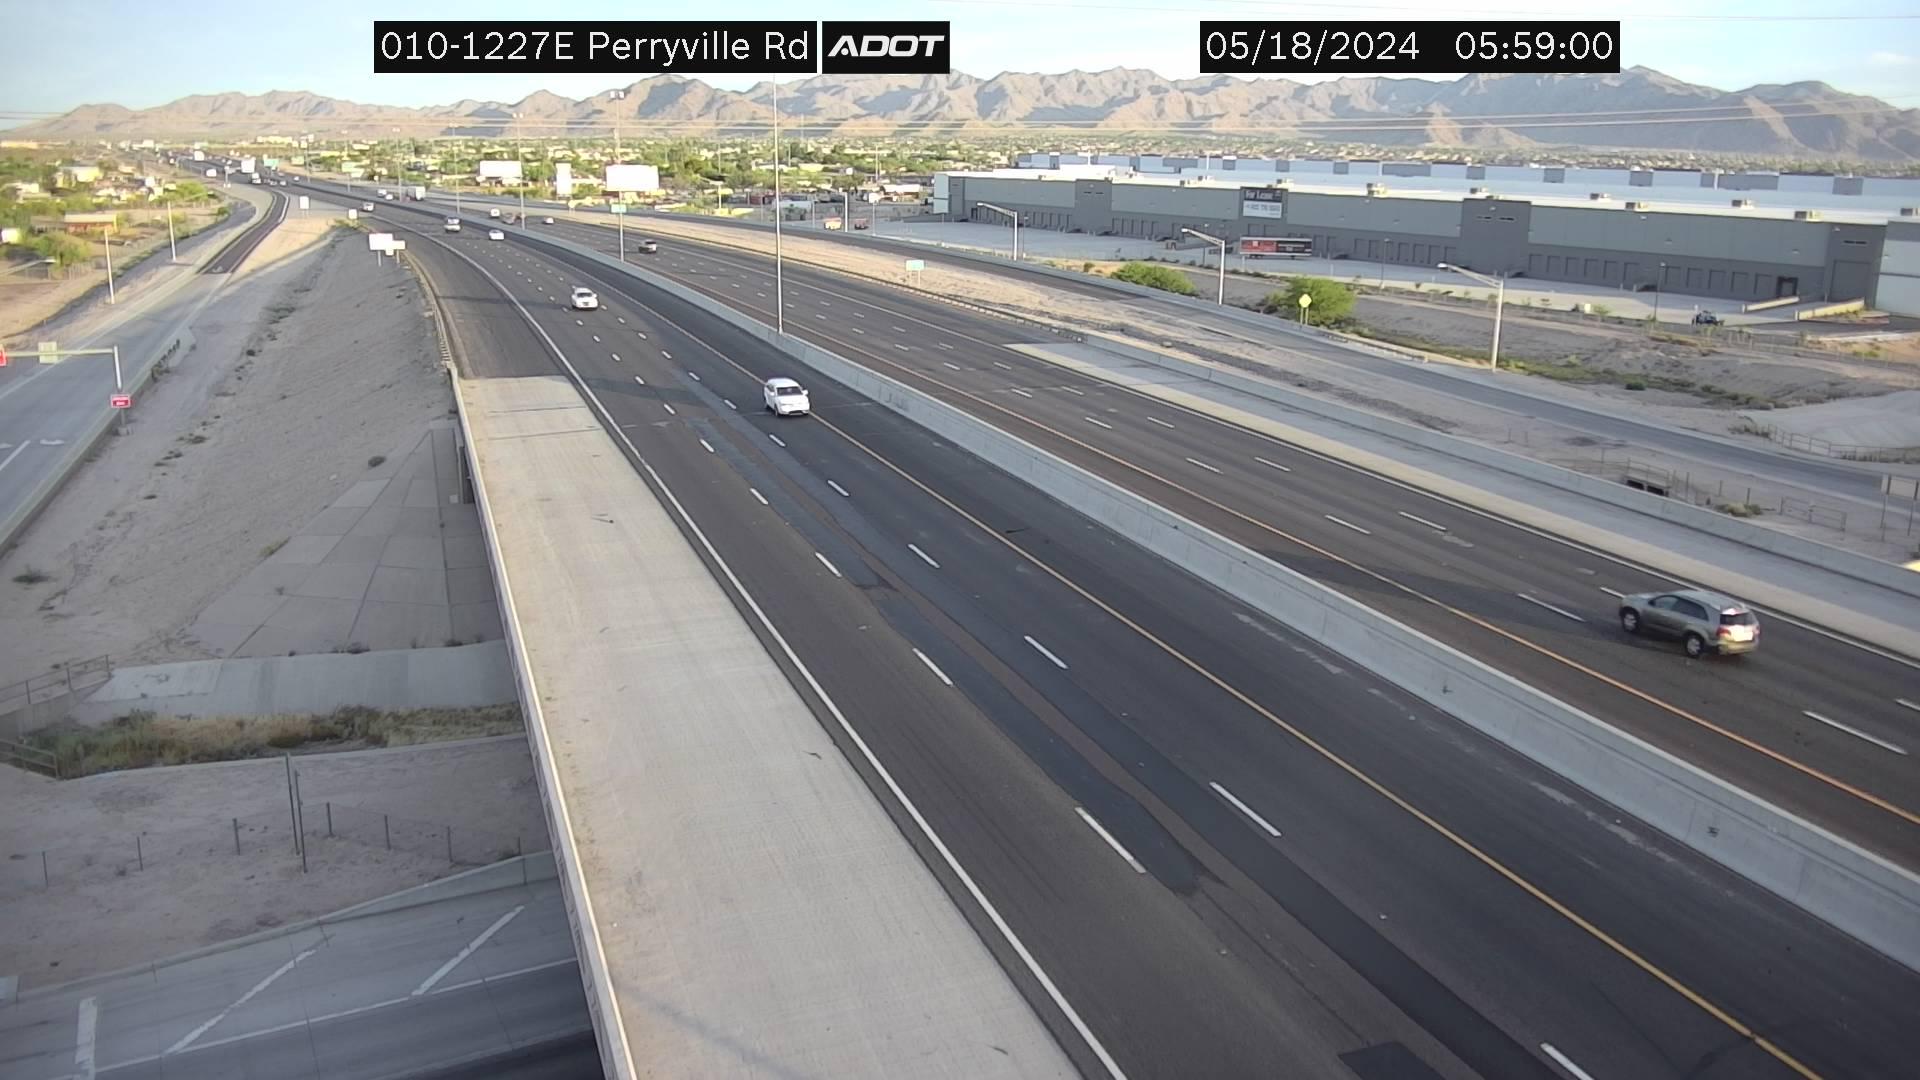 Goodyear › East: I-10 EB 122.70 @Perryville Rd Traffic Camera